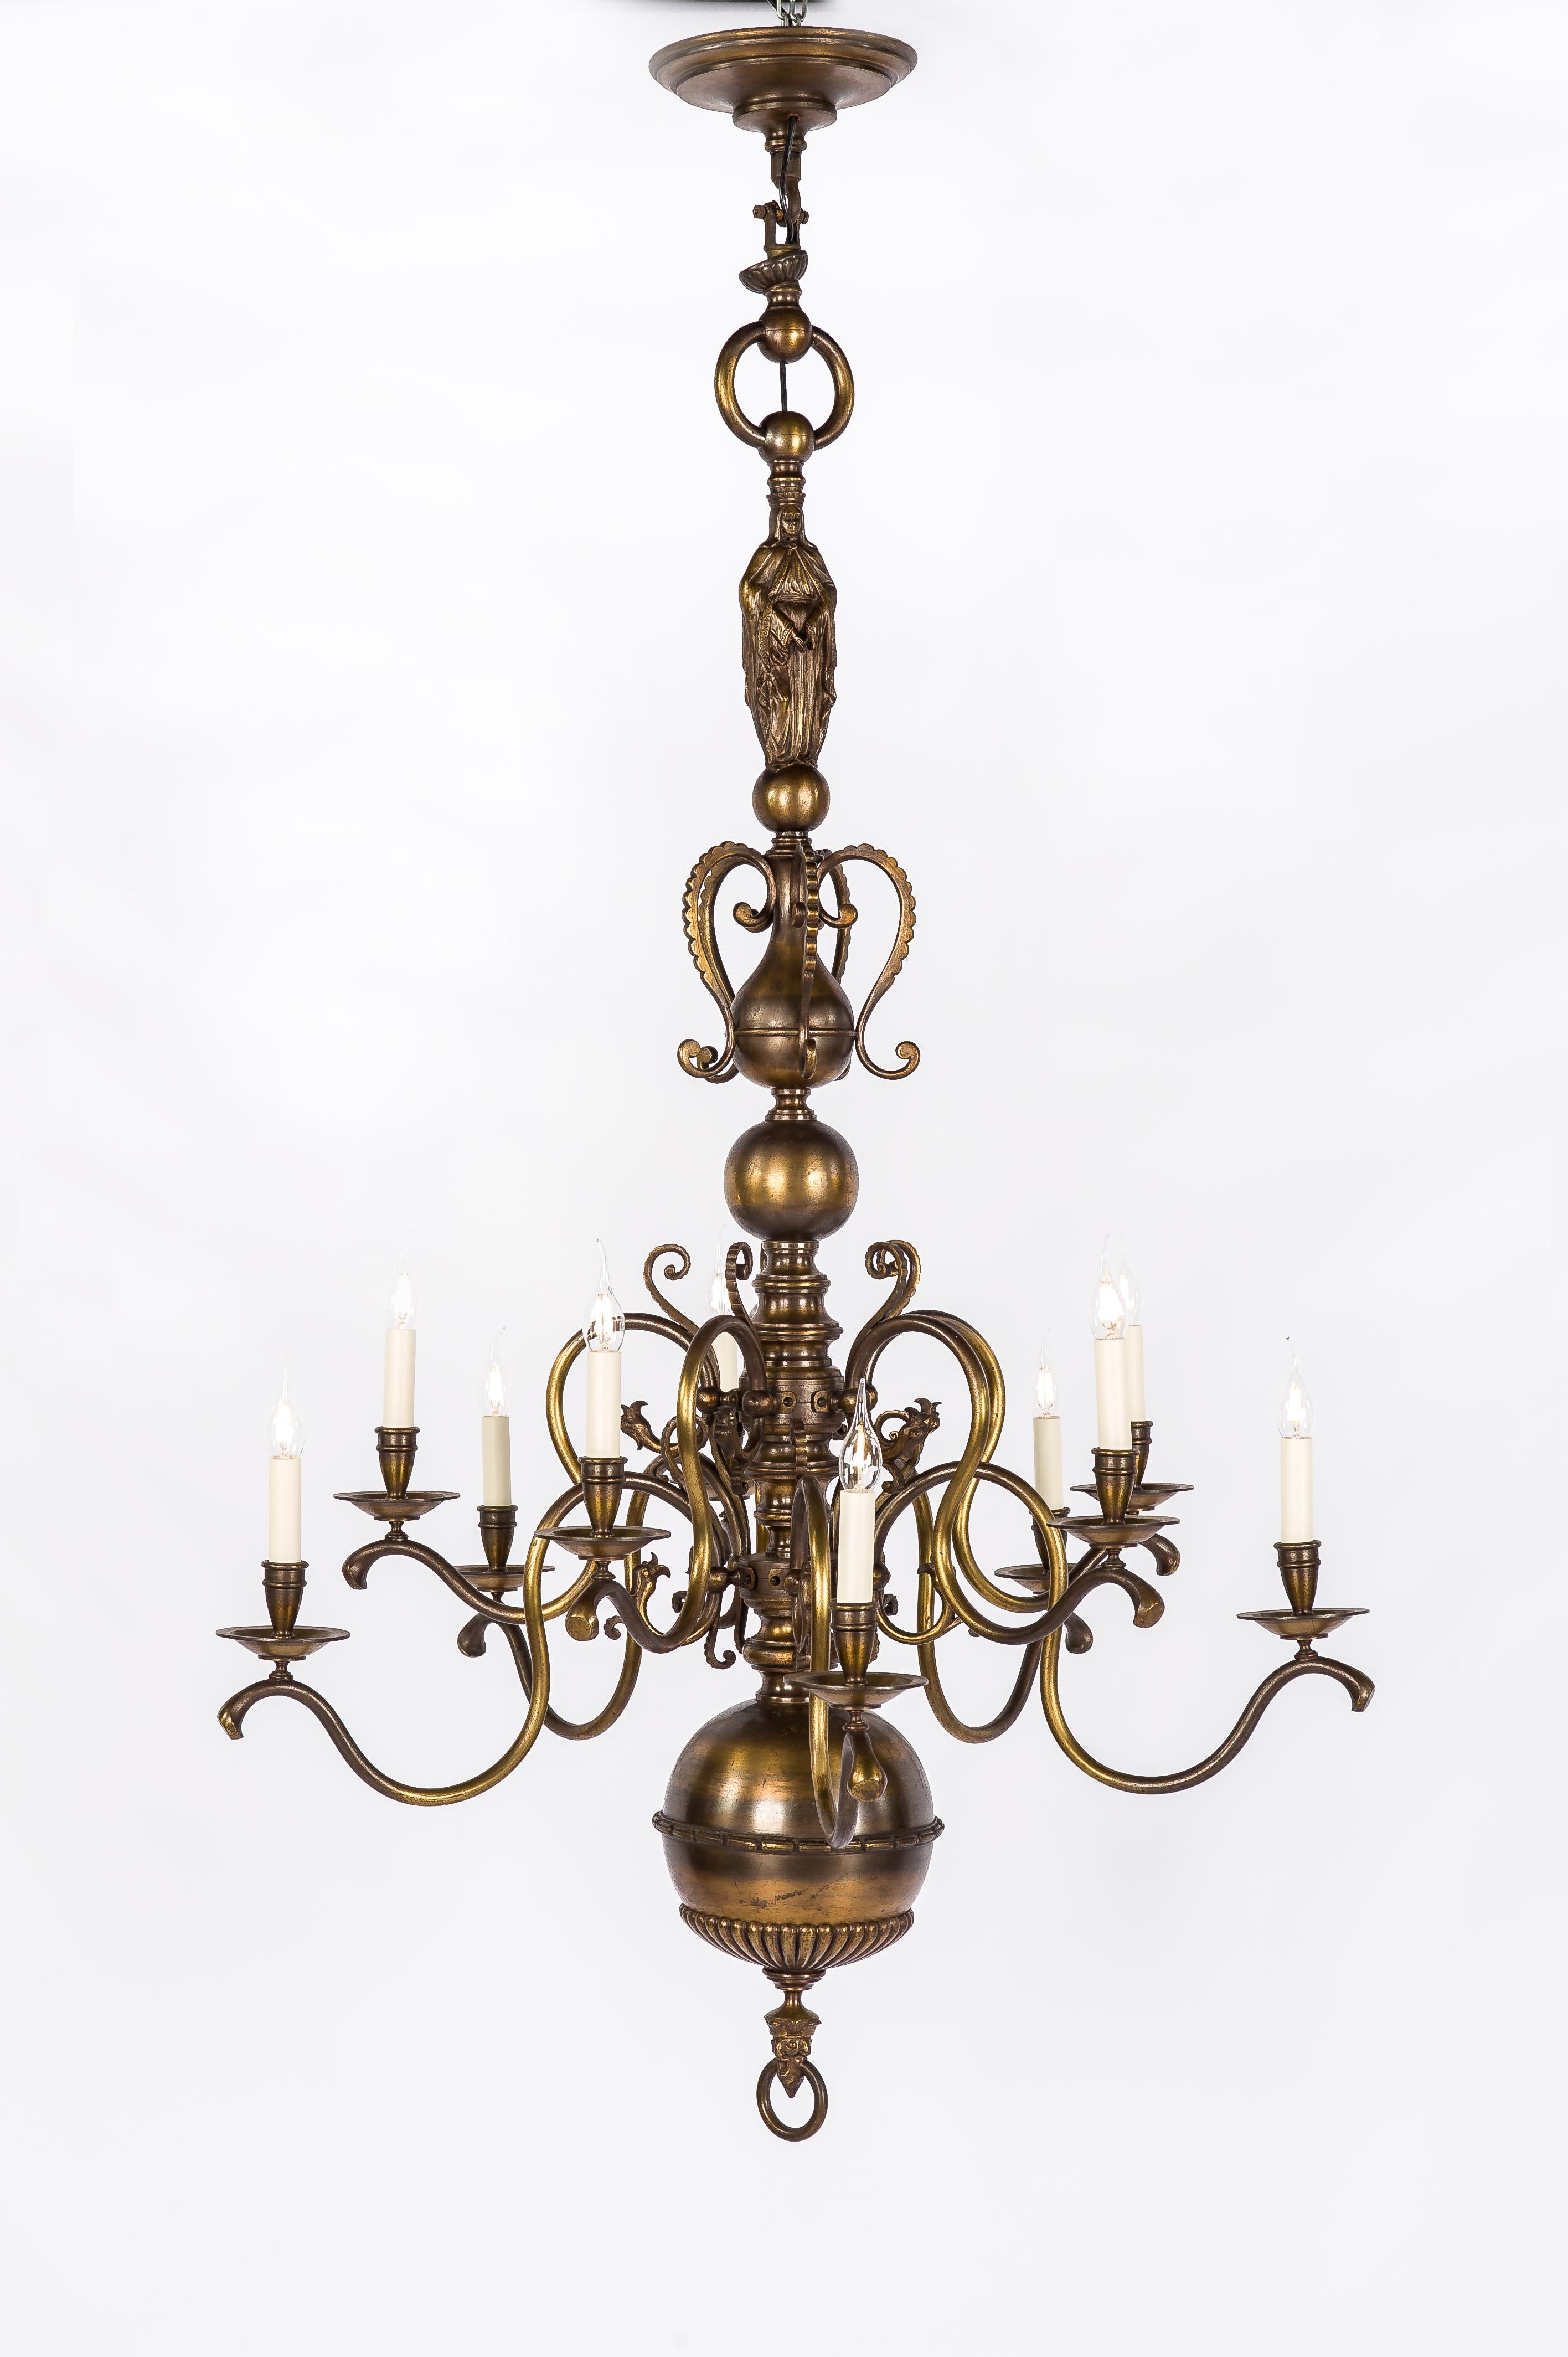 An exceptional tall two-tier Dutch or Flemish chandelier in patinated brass. The chandelier originates in The Netherlands or Belgium and was made in the early 1900s. It has the typical shape that Dutch or Flemish chandeliers are known for. It has a